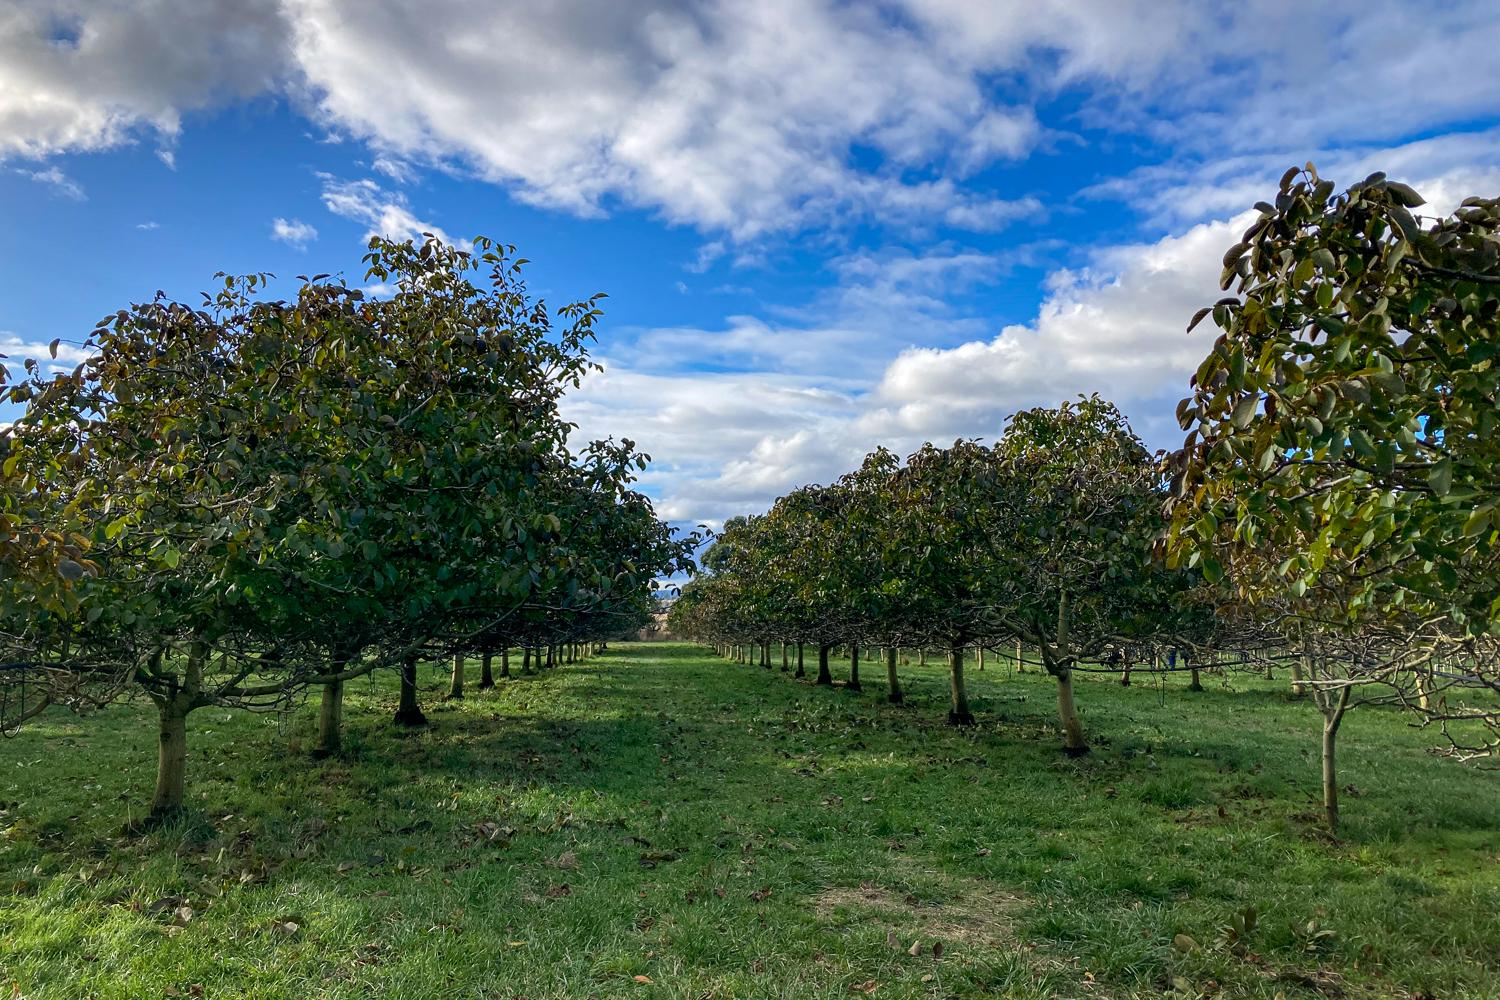 Rows of walnut trees against a cloudy blue sky